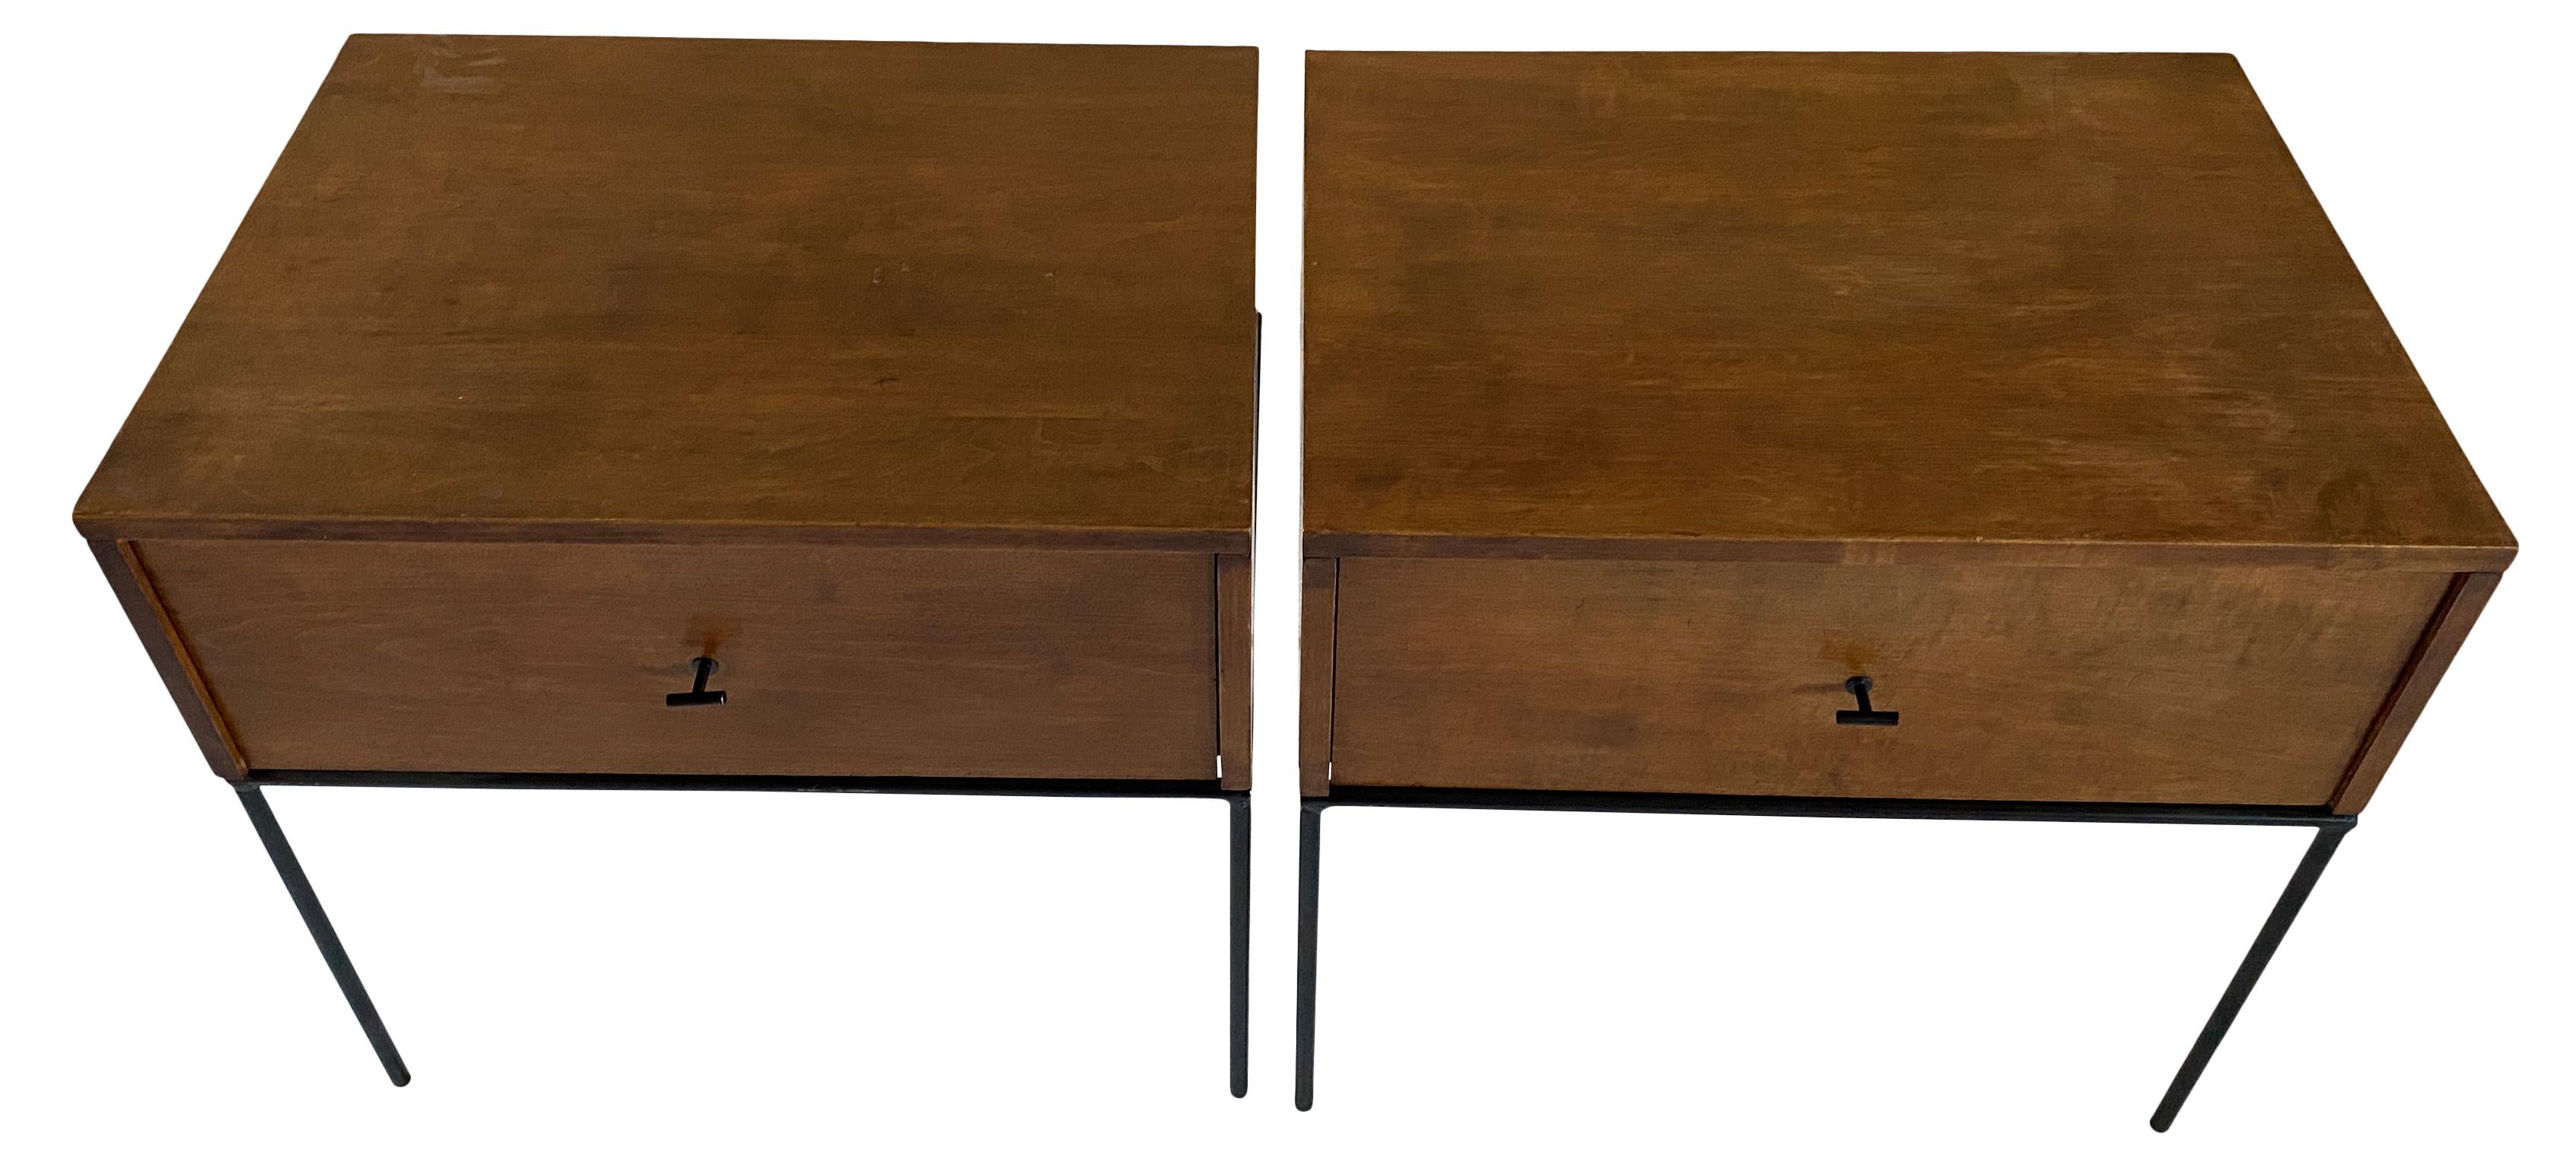 Beautiful pair of Paul McCobb Planner Group #1500 maple nightstands end tables single drawer. Black T pull knobs. Original vintage condition with walnut brown finish on maple. Very modern designed pair of nightstands with Iron Base with 4 legs. All